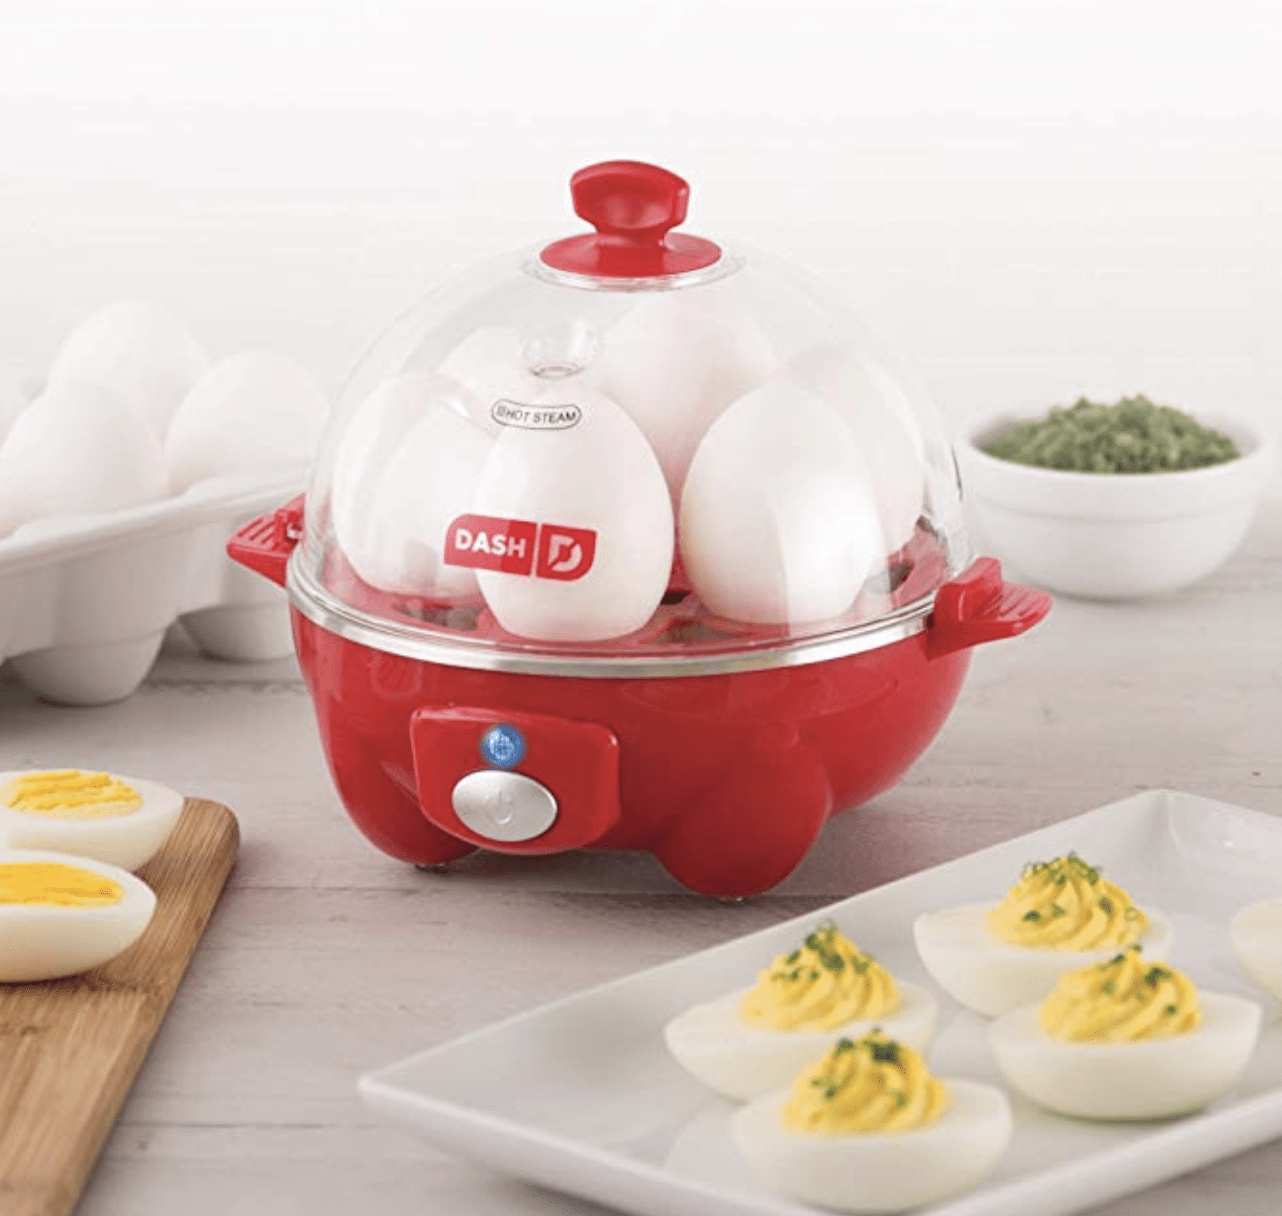 Why I Love the Mojoco Rapid Egg Cooker: Tried & Tested